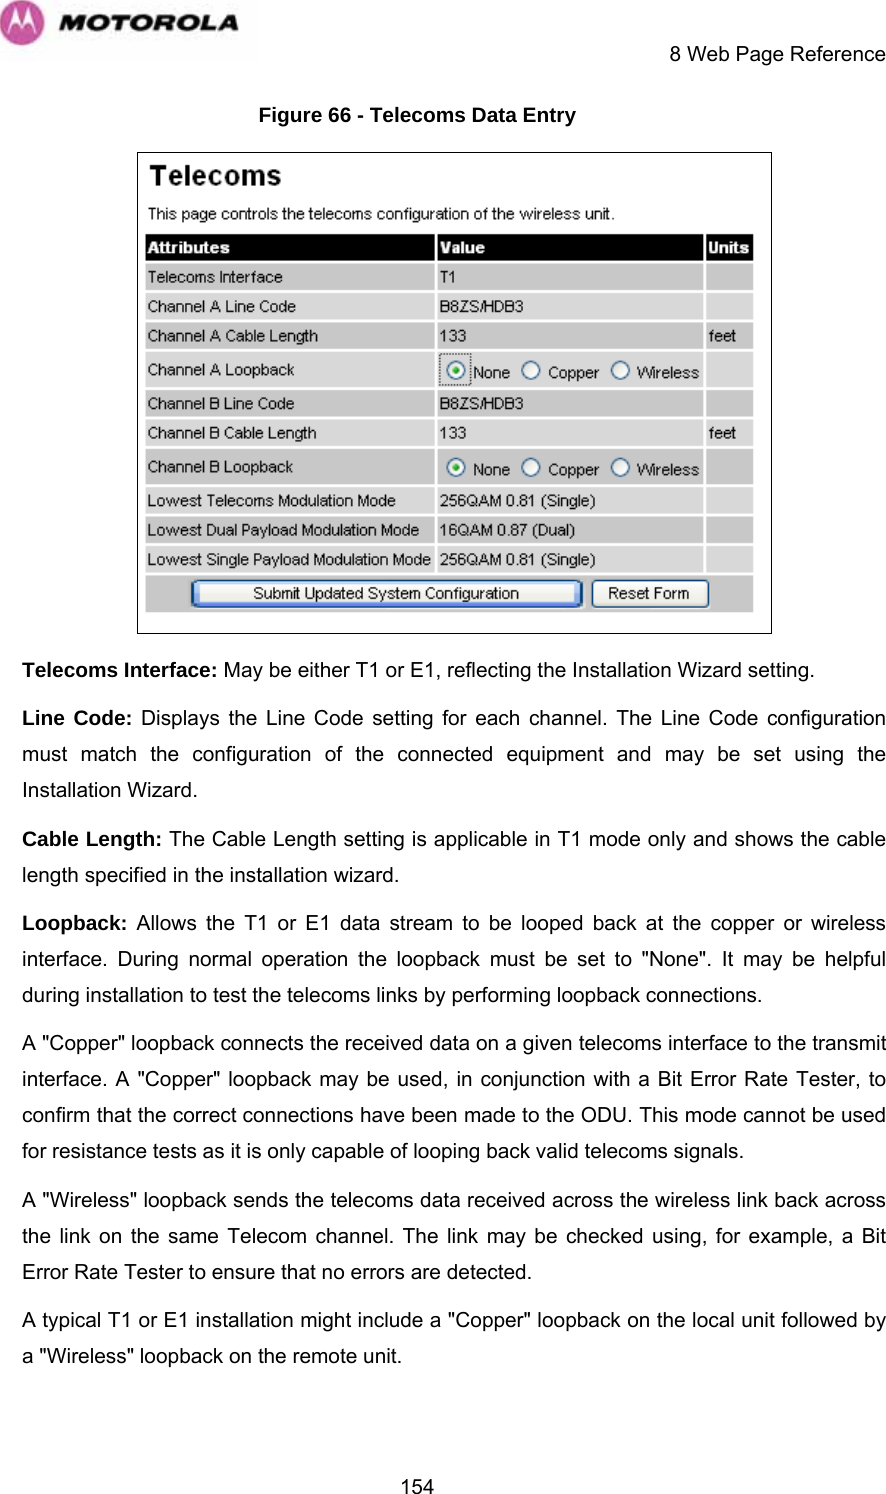     8 Web Page Reference  154Figure 66 - Telecoms Data Entry  Telecoms Interface: May be either T1 or E1, reflecting the Installation Wizard setting. Line Code: Displays the Line Code setting for each channel. The Line Code configuration must match the configuration of the connected equipment and may be set using the Installation Wizard.  Cable Length: The Cable Length setting is applicable in T1 mode only and shows the cable length specified in the installation wizard. Loopback: Allows the T1 or E1 data stream to be looped back at the copper or wireless interface. During normal operation the loopback must be set to &quot;None&quot;. It may be helpful during installation to test the telecoms links by performing loopback connections. A &quot;Copper&quot; loopback connects the received data on a given telecoms interface to the transmit interface. A &quot;Copper&quot; loopback may be used, in conjunction with a Bit Error Rate Tester, to confirm that the correct connections have been made to the ODU. This mode cannot be used for resistance tests as it is only capable of looping back valid telecoms signals. A &quot;Wireless&quot; loopback sends the telecoms data received across the wireless link back across the link on the same Telecom channel. The link may be checked using, for example, a Bit Error Rate Tester to ensure that no errors are detected. A typical T1 or E1 installation might include a &quot;Copper&quot; loopback on the local unit followed by a &quot;Wireless&quot; loopback on the remote unit. 